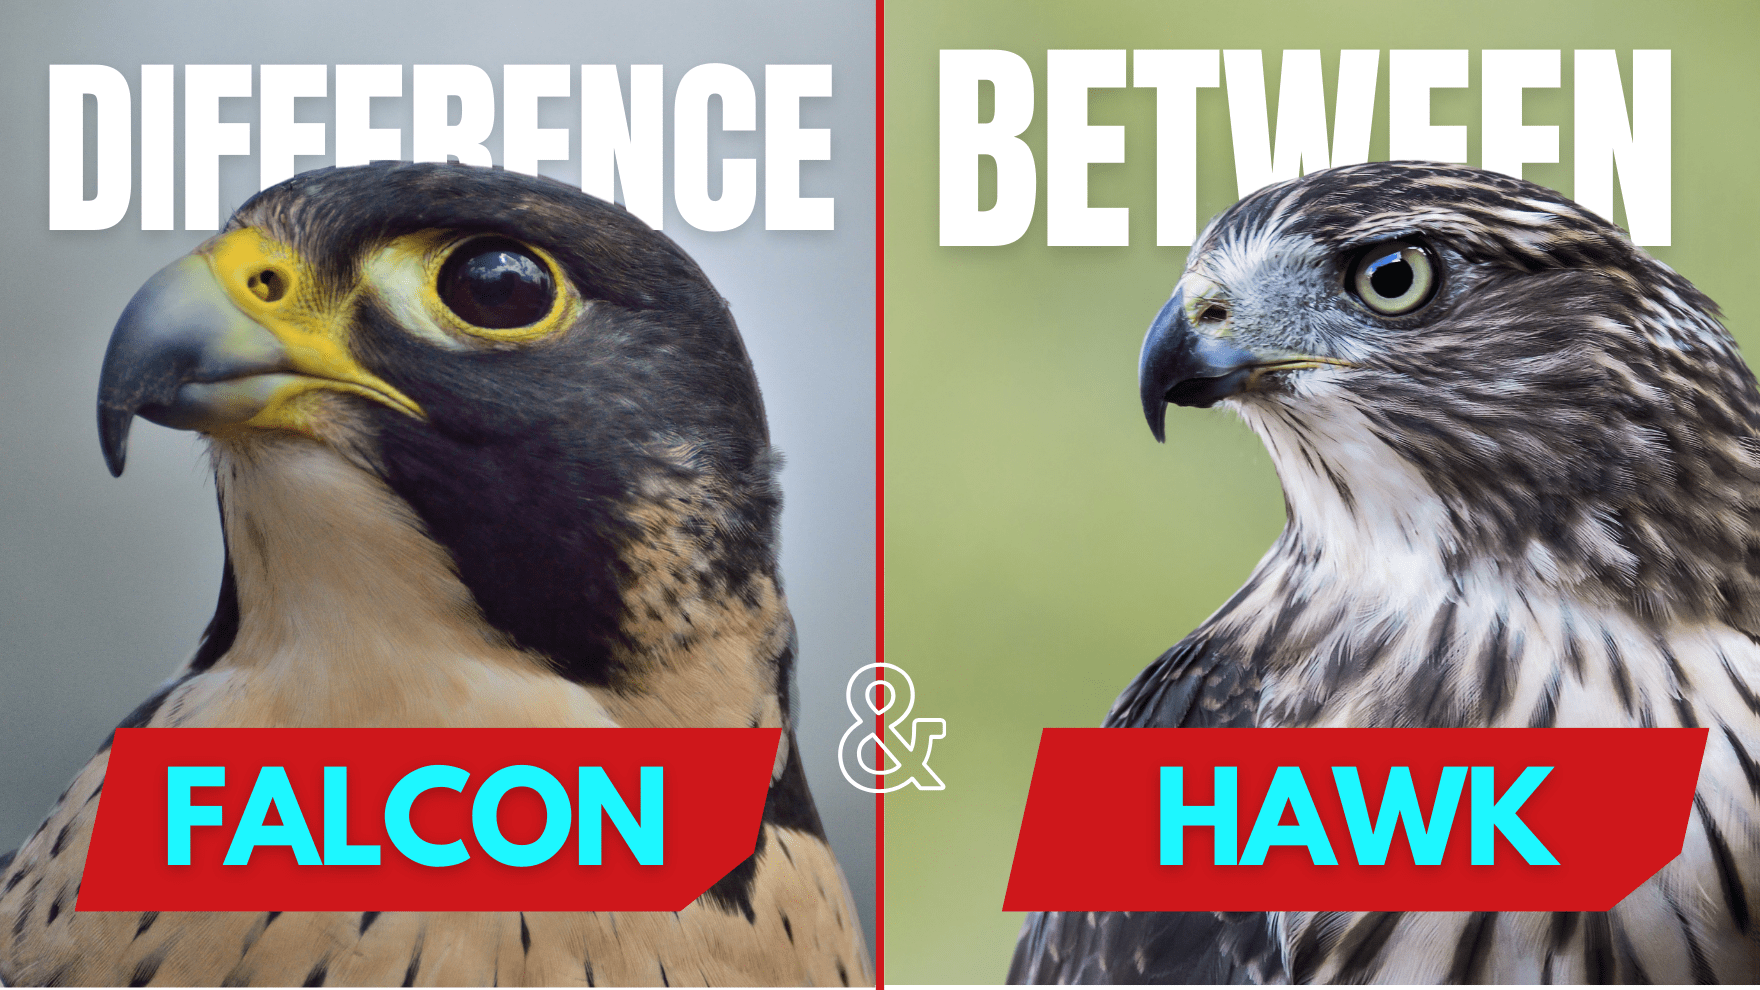 Difference Between a Falcon and a Hawk